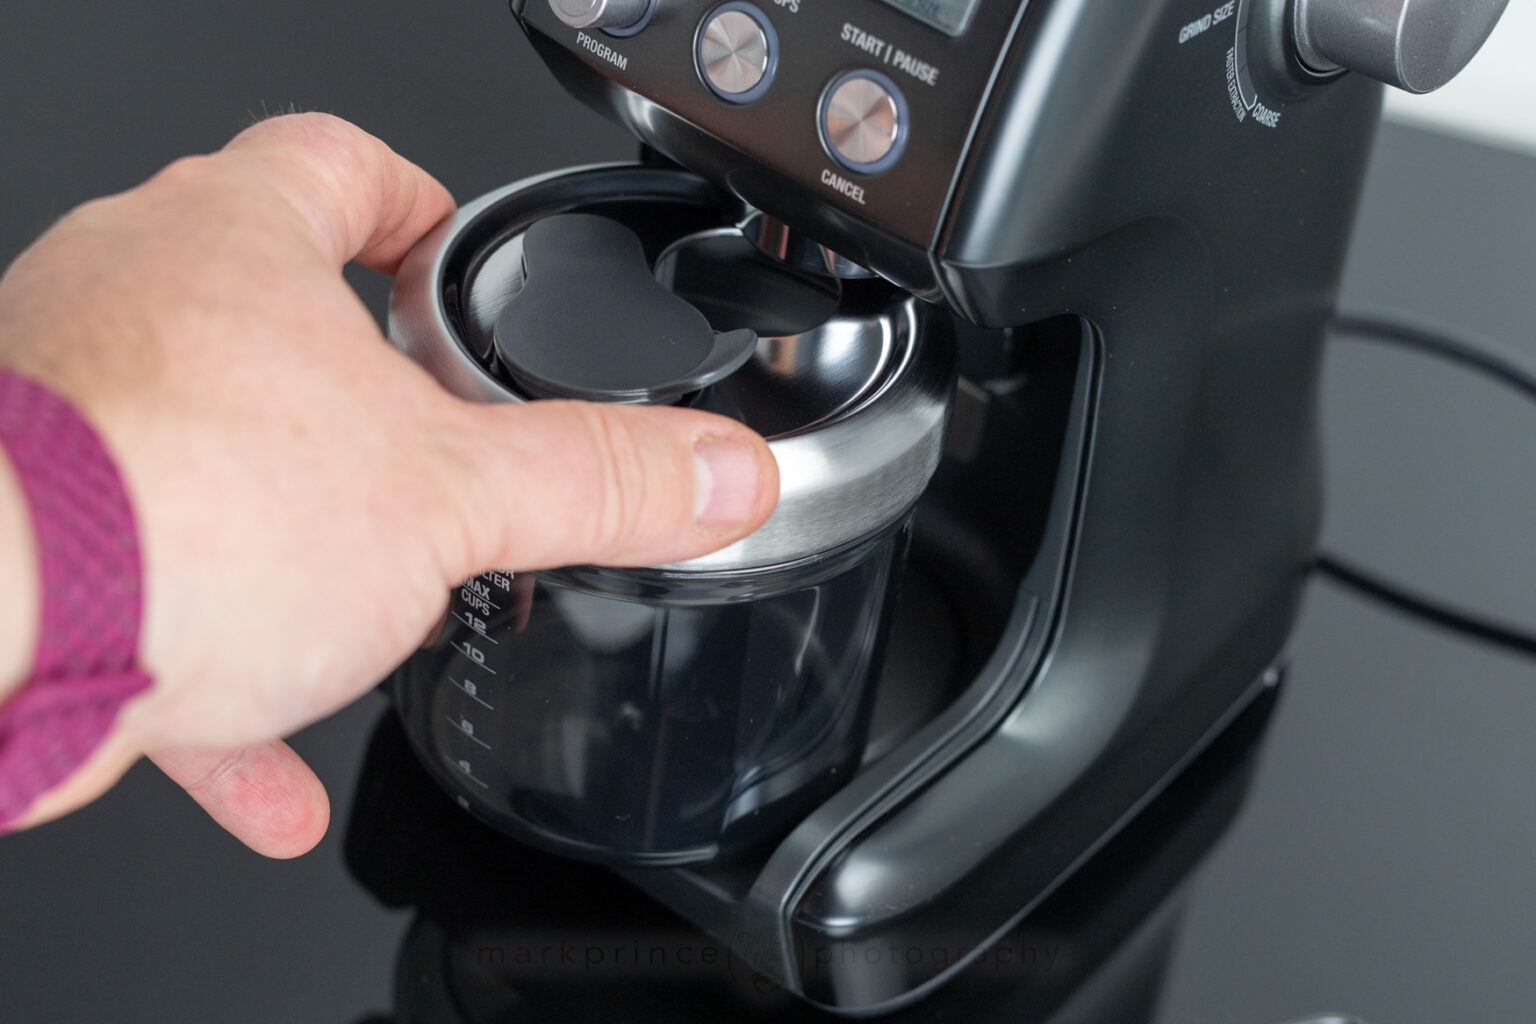 The grinds bin slots nicely under the grind spout thanks in part to a back-magnet that pulls it into the final place.